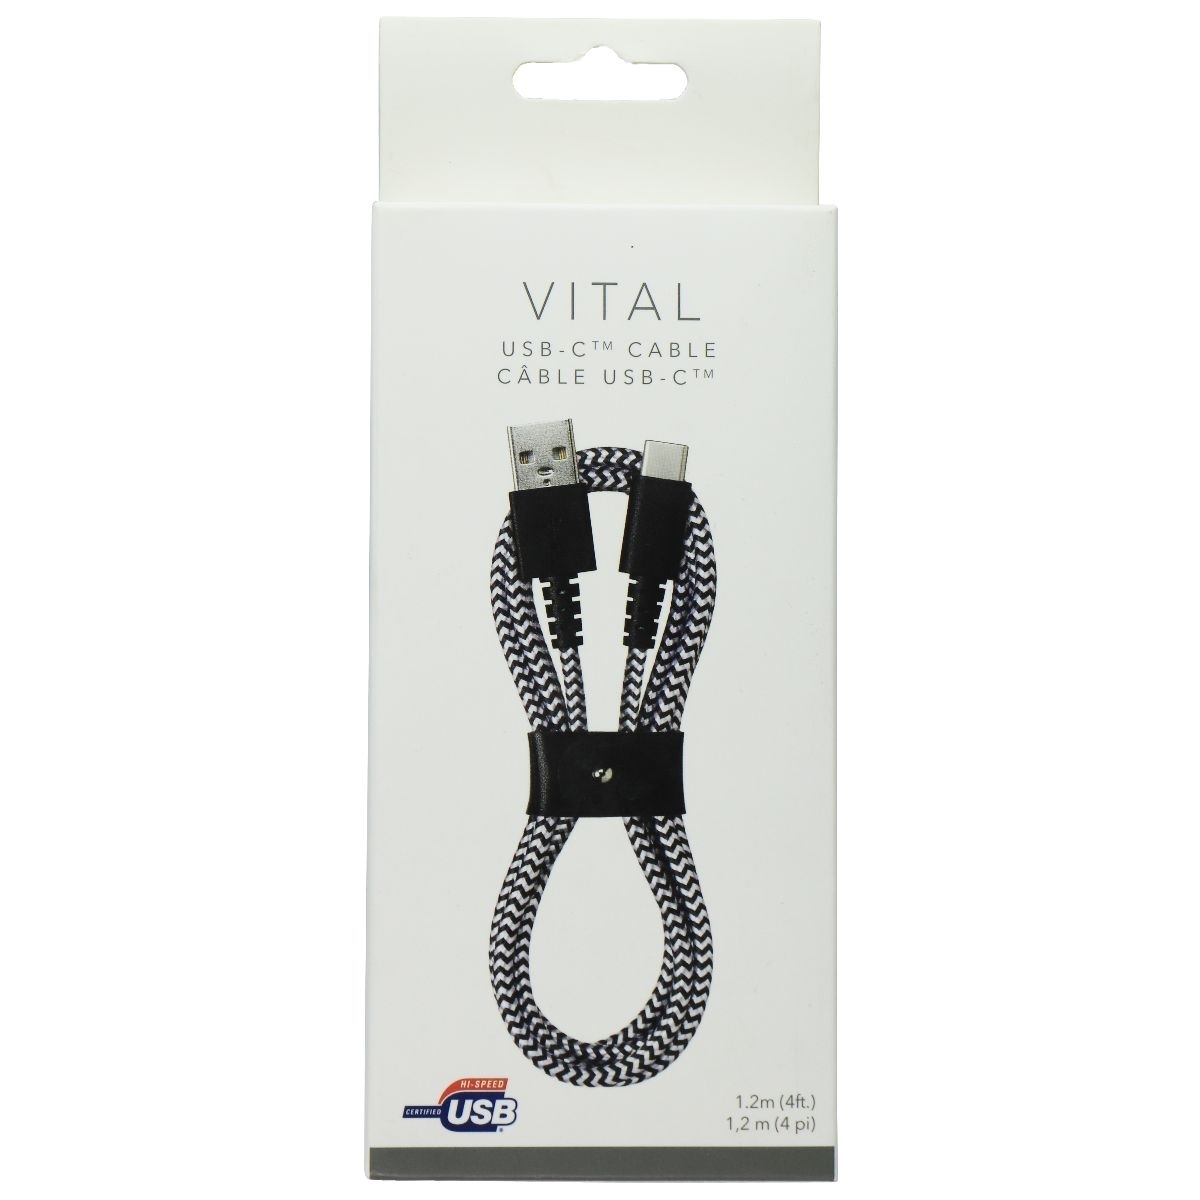 VITAL (4-Ft) Brainded USB-C To USB Charge/Sync Cable - Black/White Stripe (Refurbished)